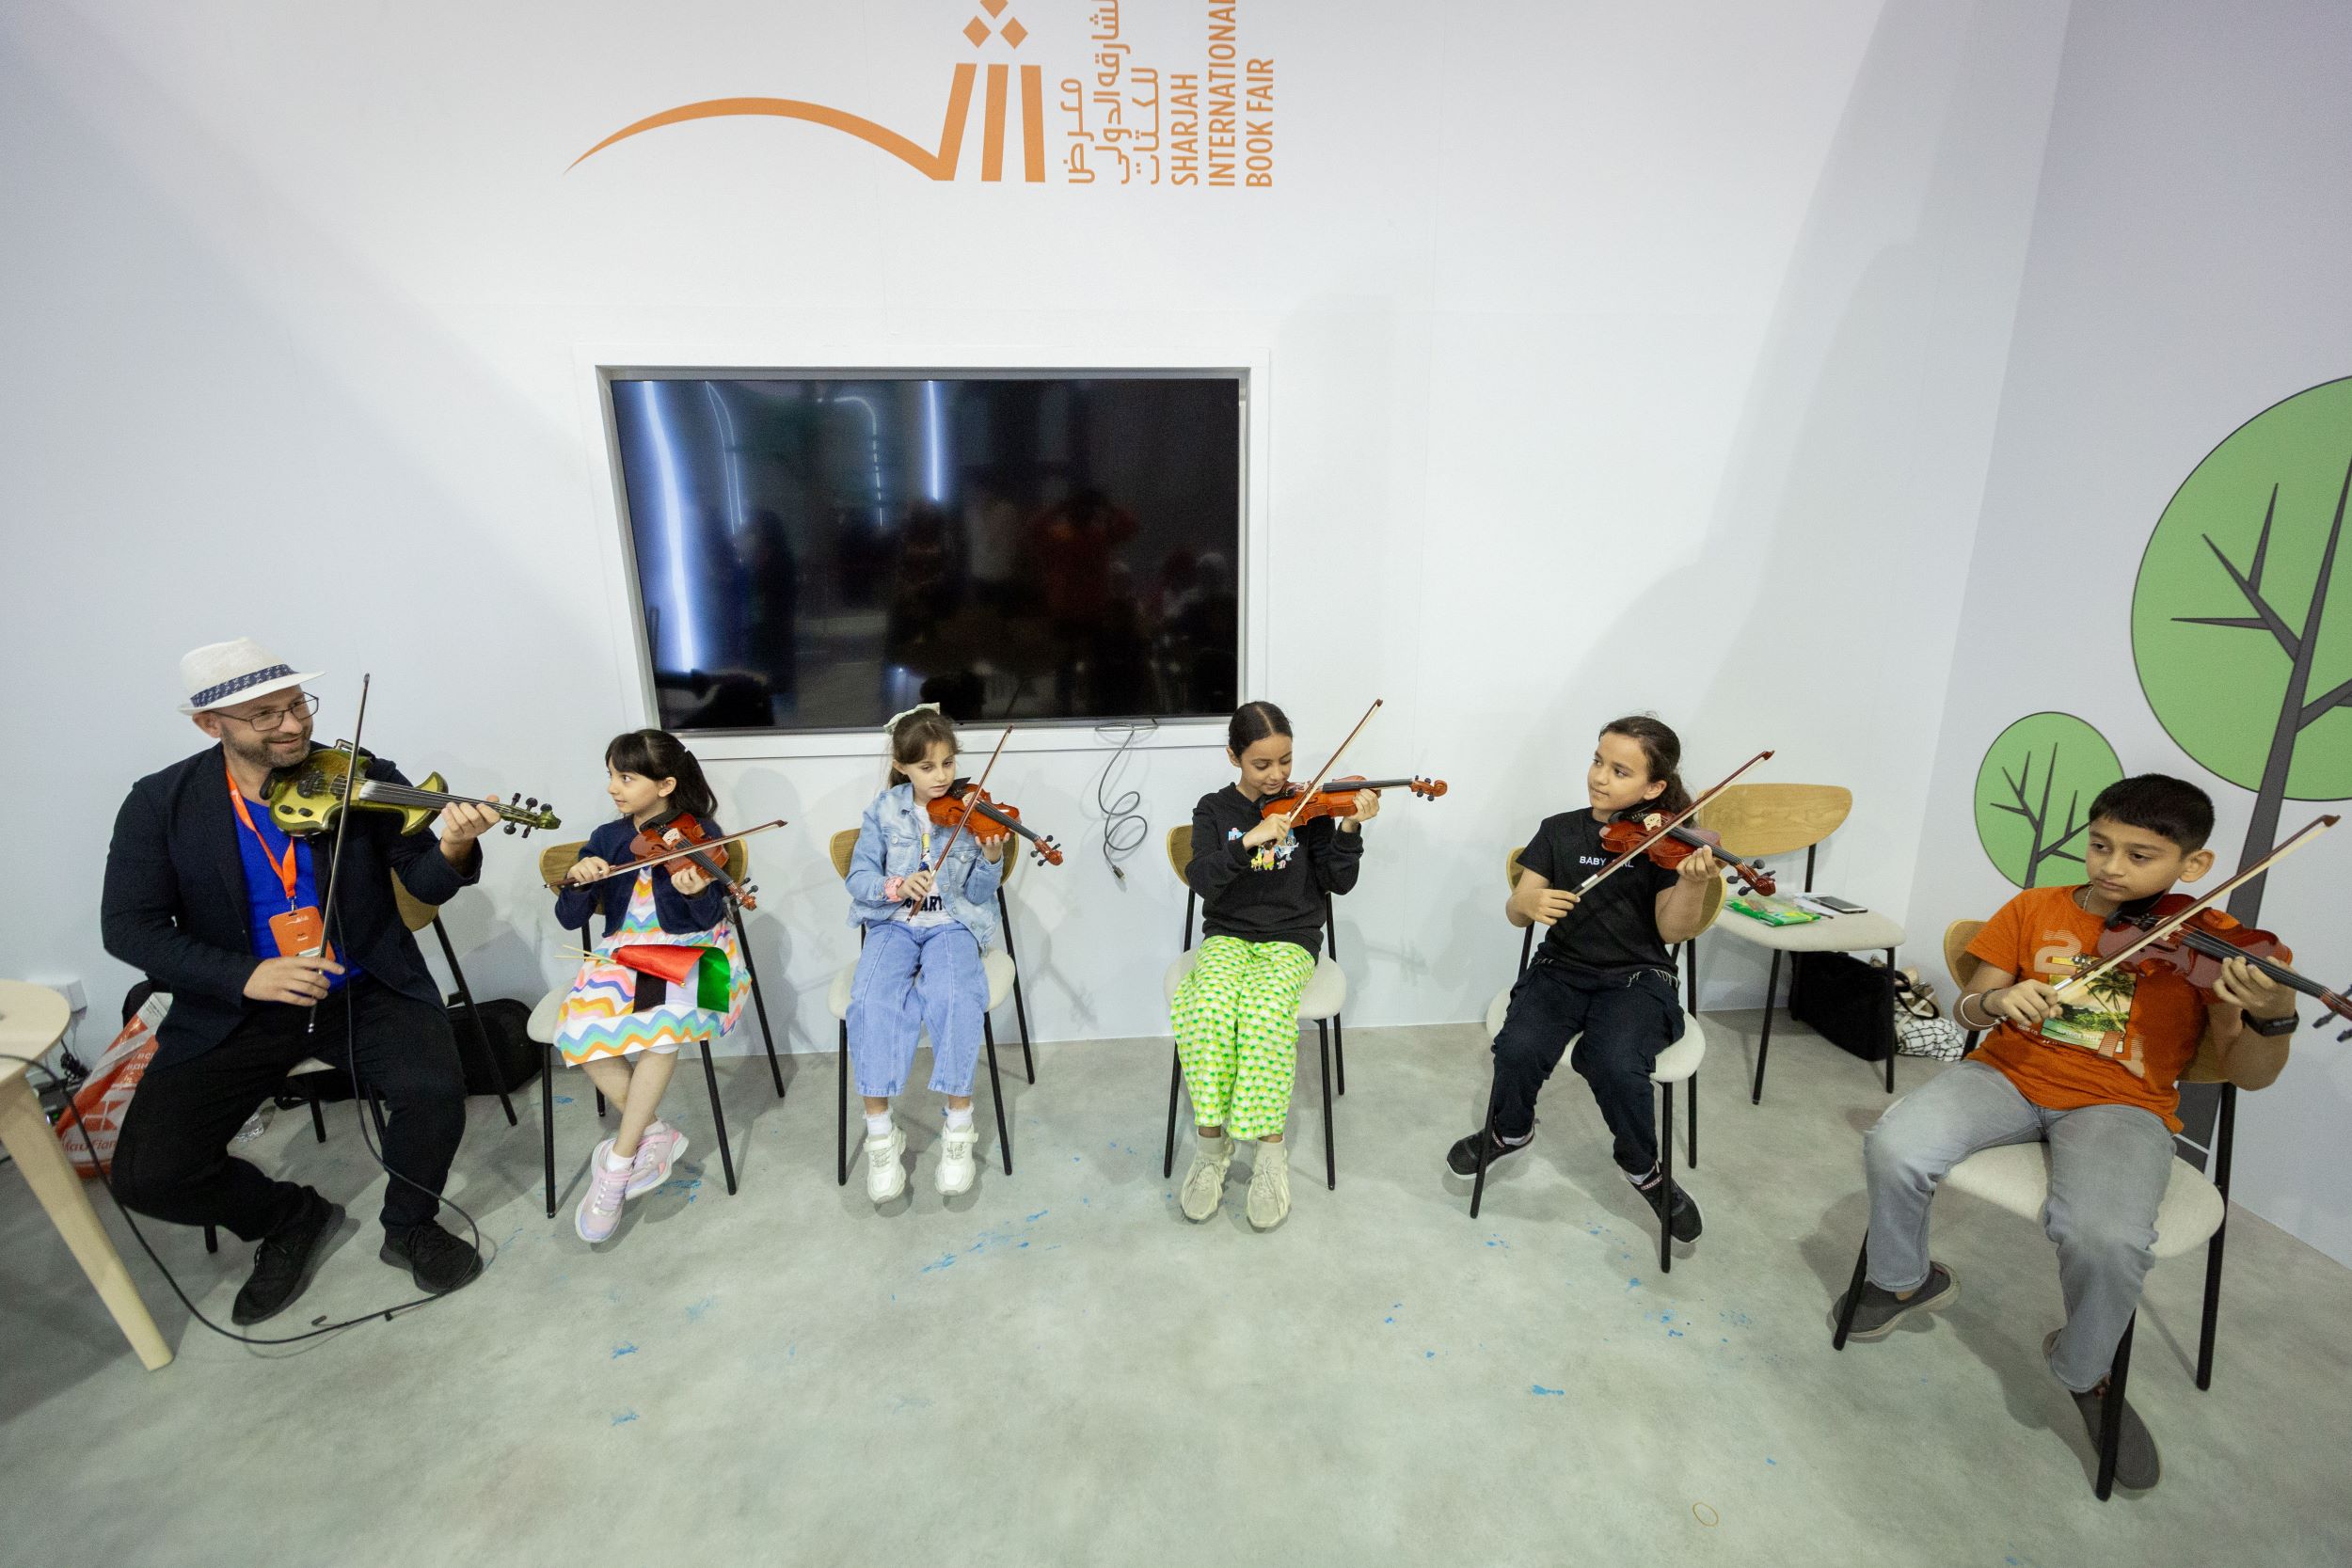 Sharjah International Book Fair 2023 strikes a melodious note with young talents